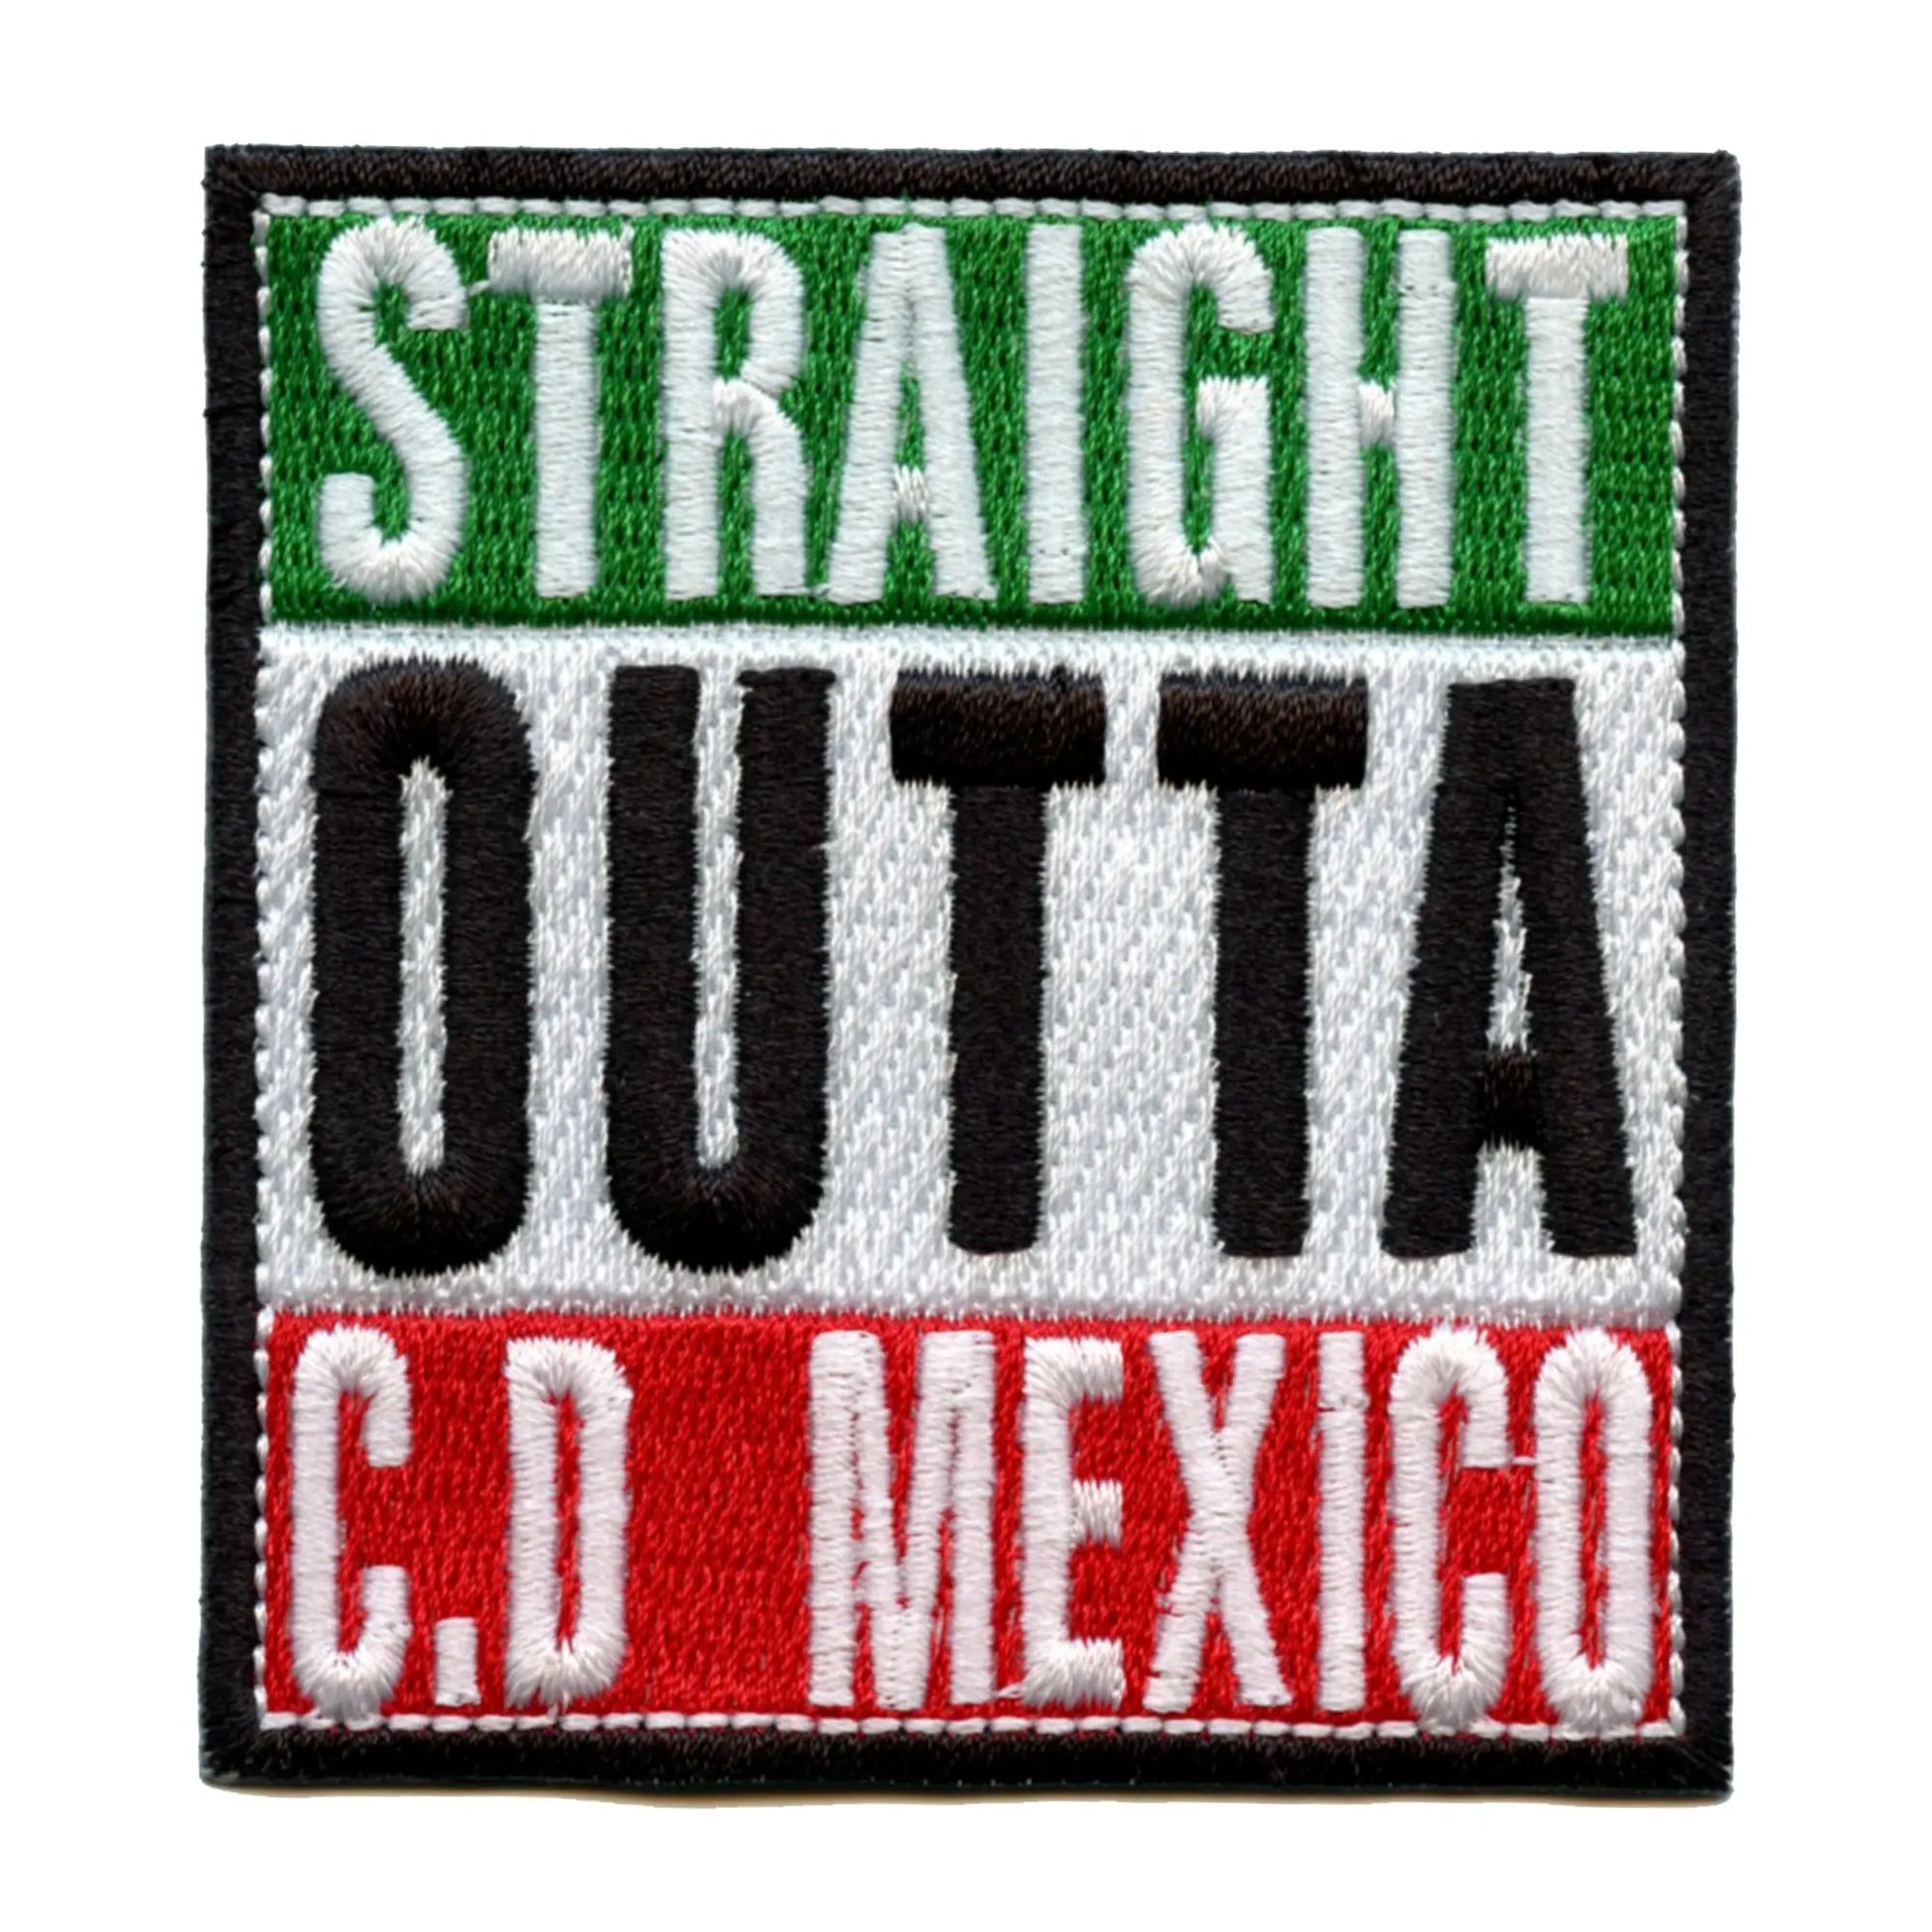 Straight Outta C.D Mexico City Embroidered Iron On Patch 